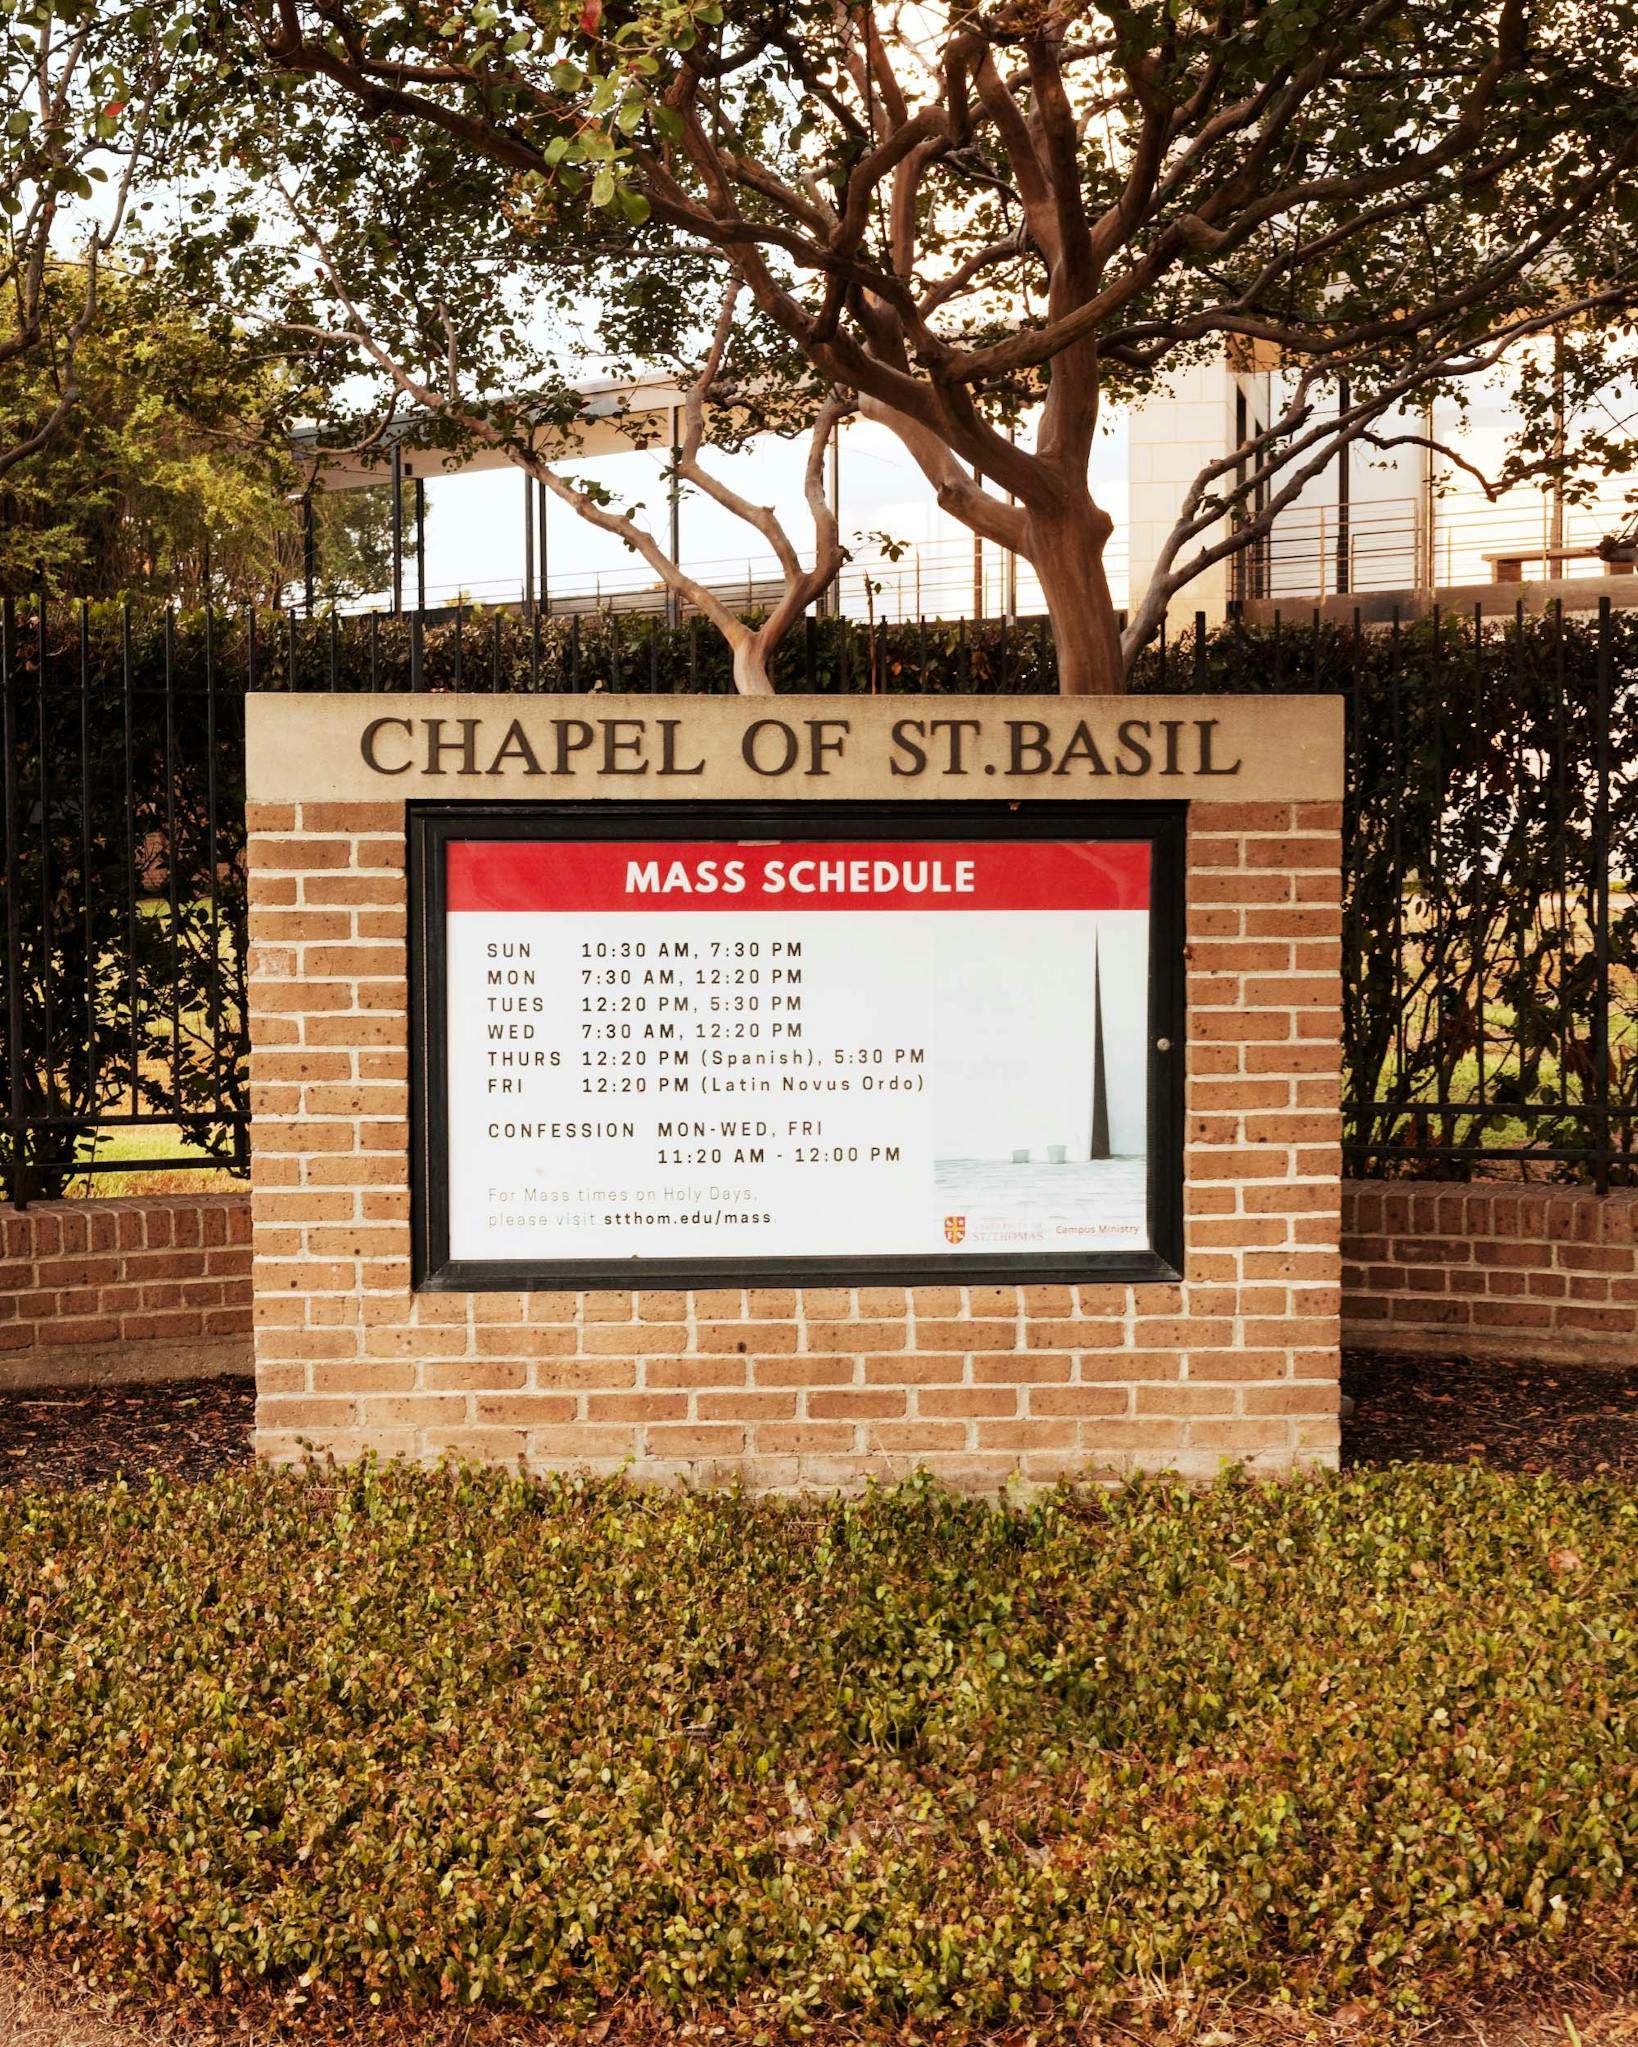 The Chapel of St. Basil, in Houston.